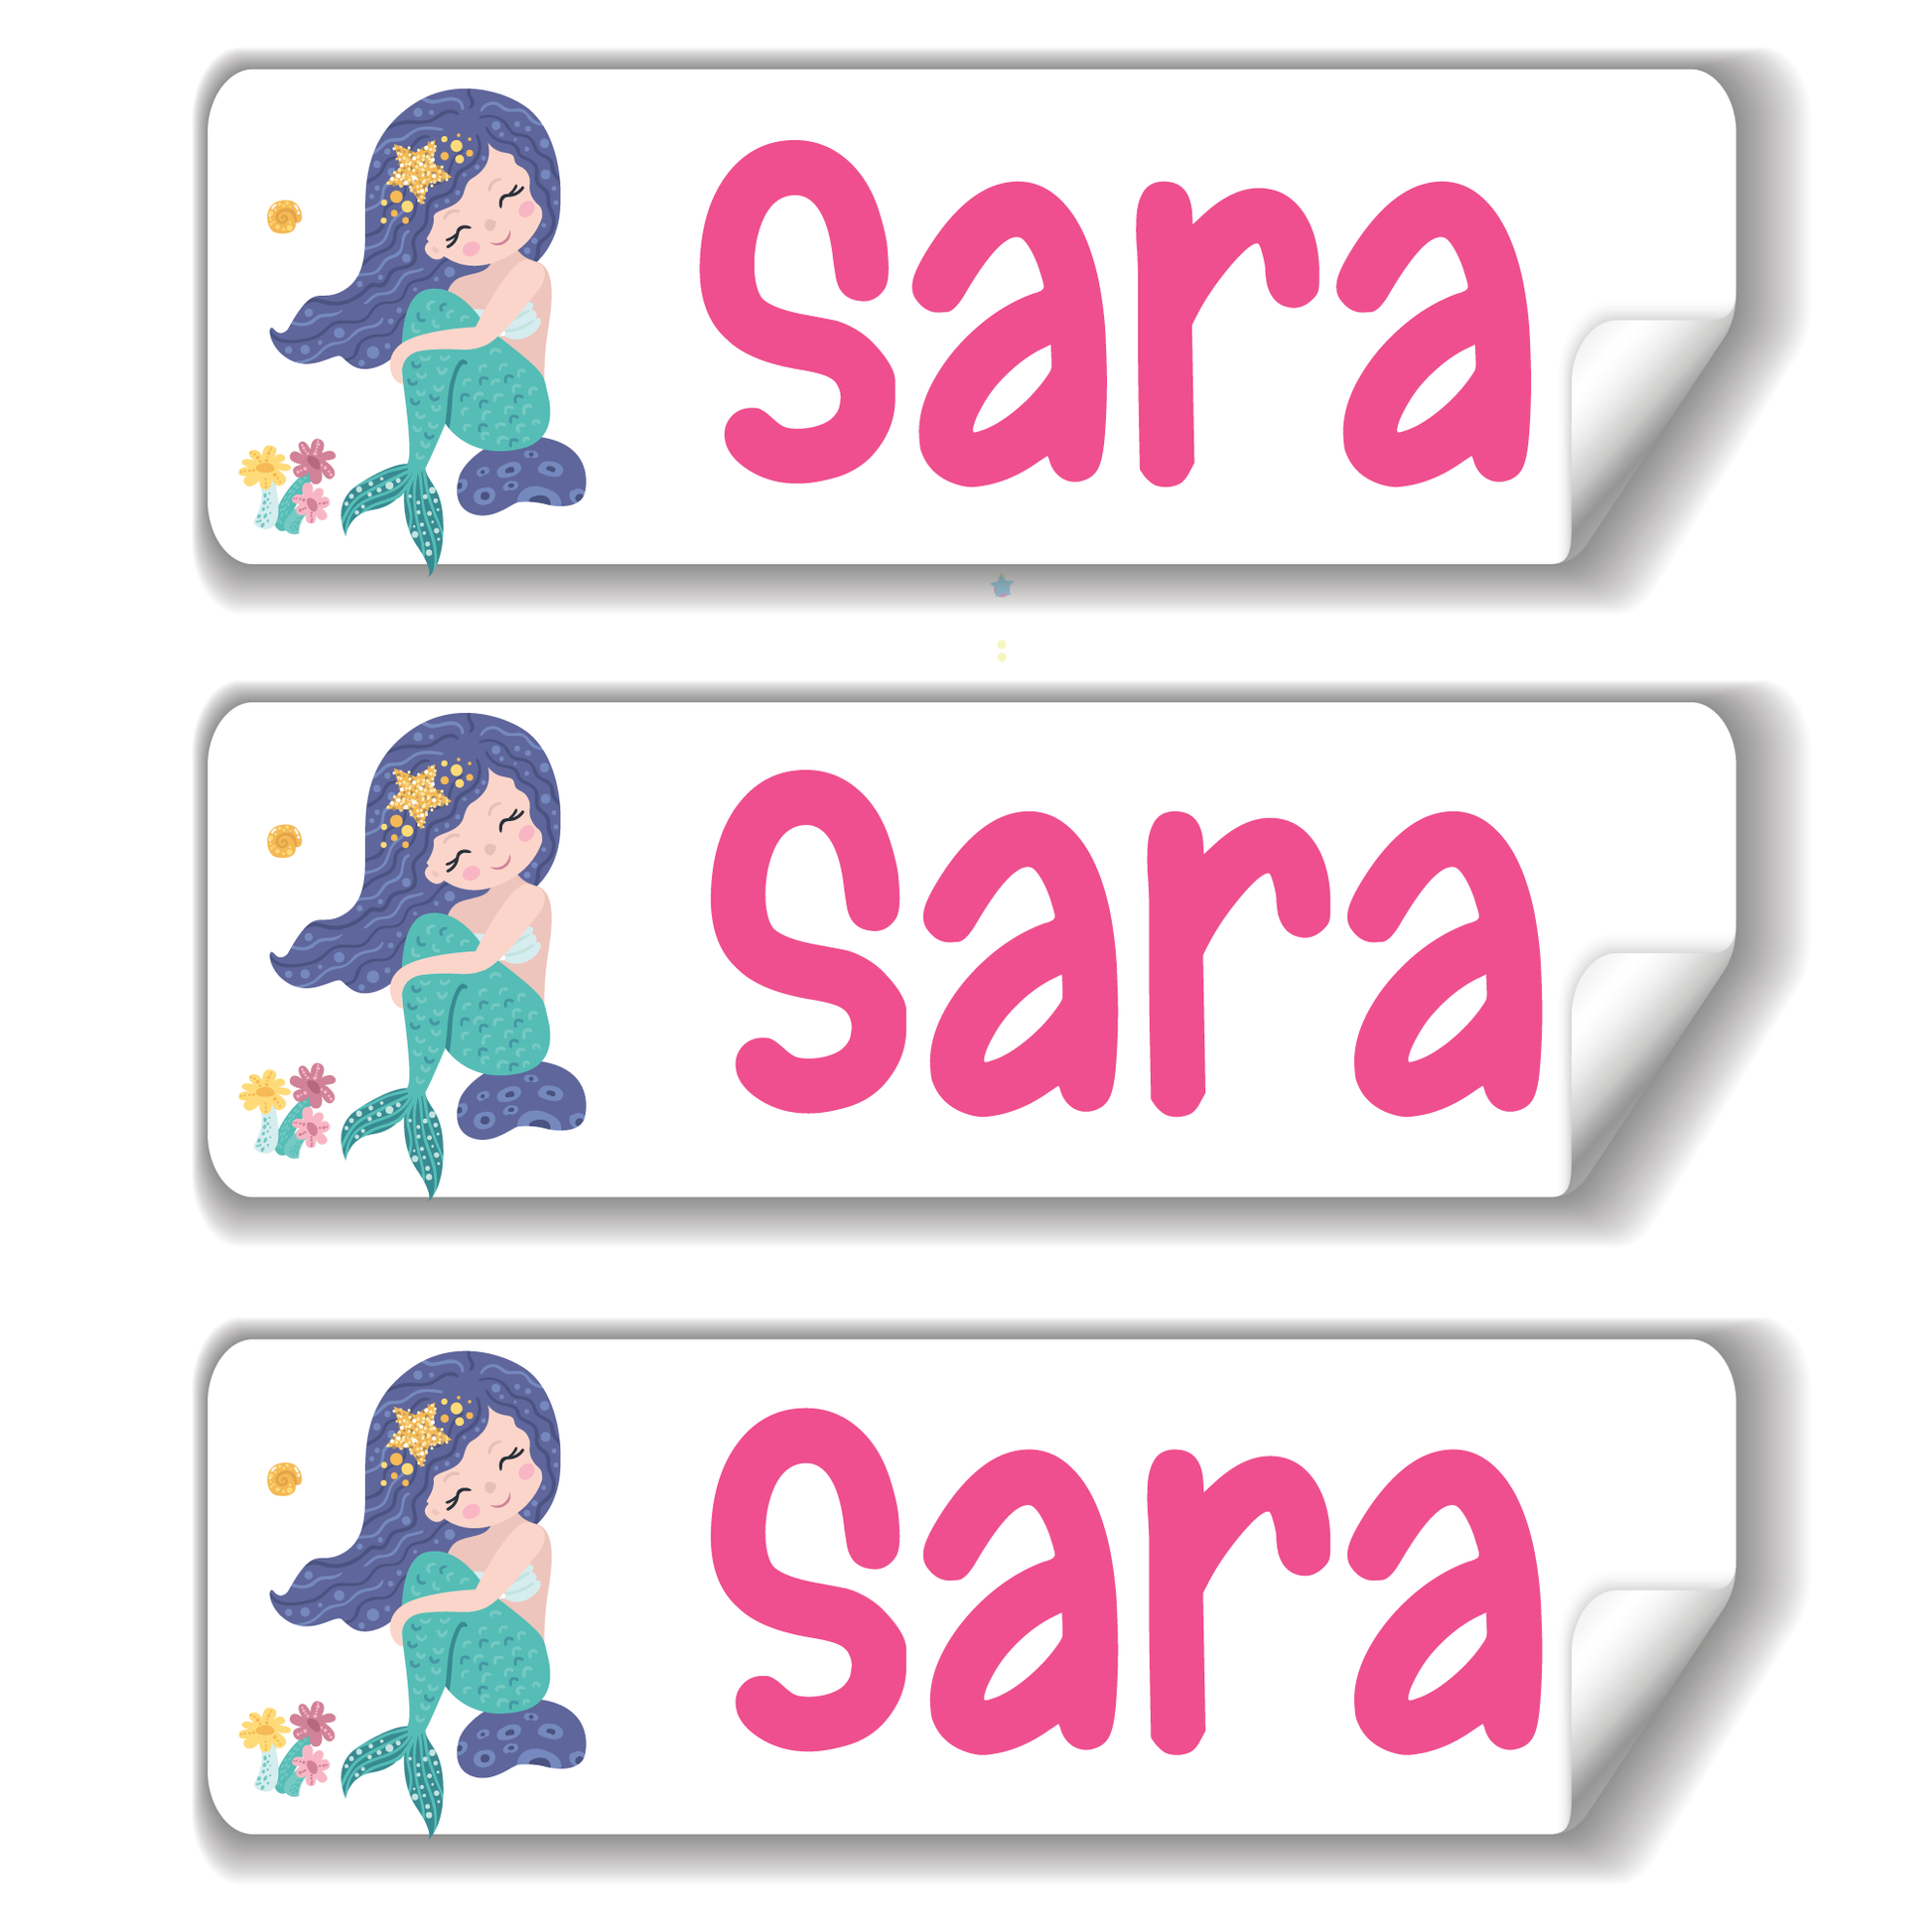 Personalized school label and sticker with custom design, making it easy to add a personal touch to your child's belongings